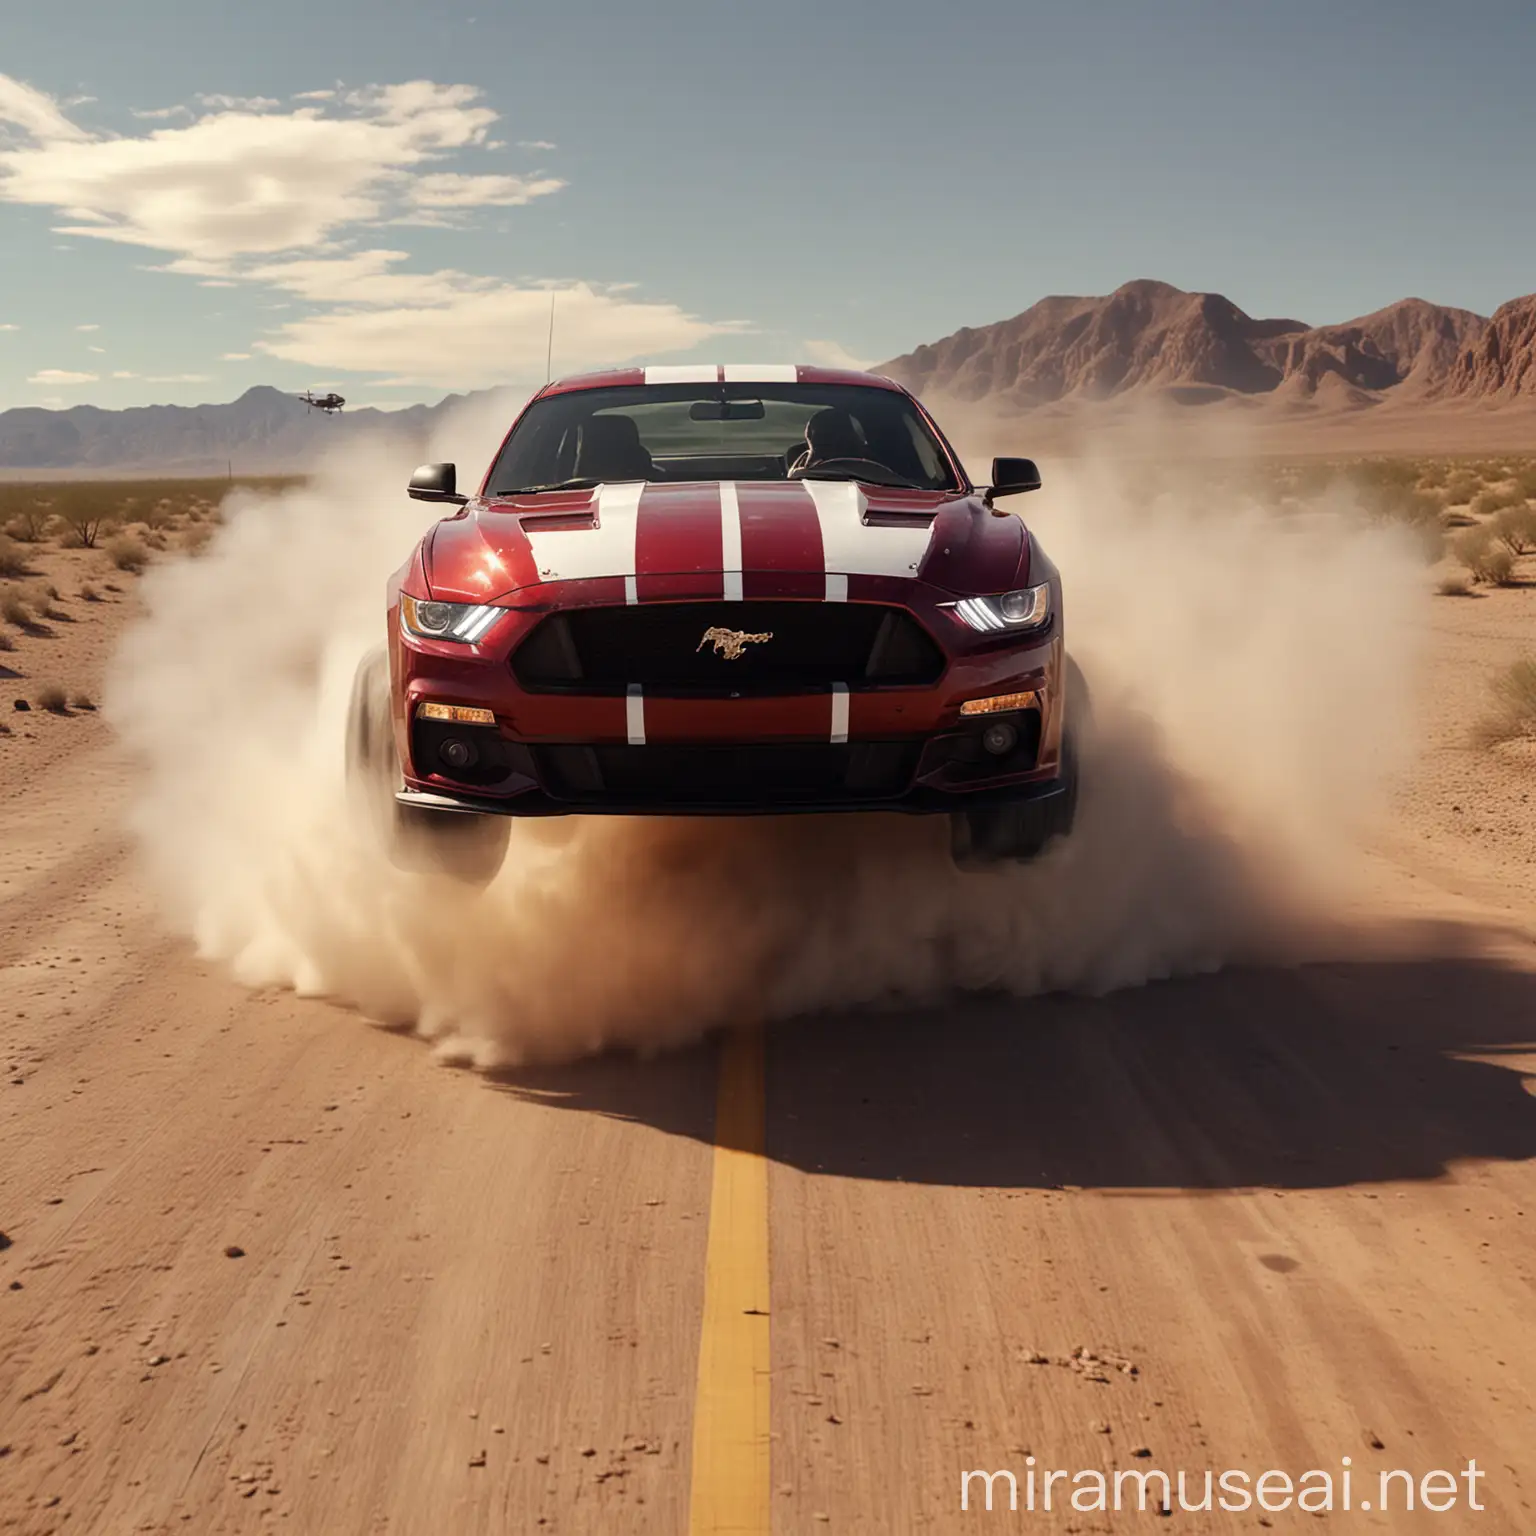 HighOctane Desert Chase Maroon Ford Mustang Evades Helicopter Attack